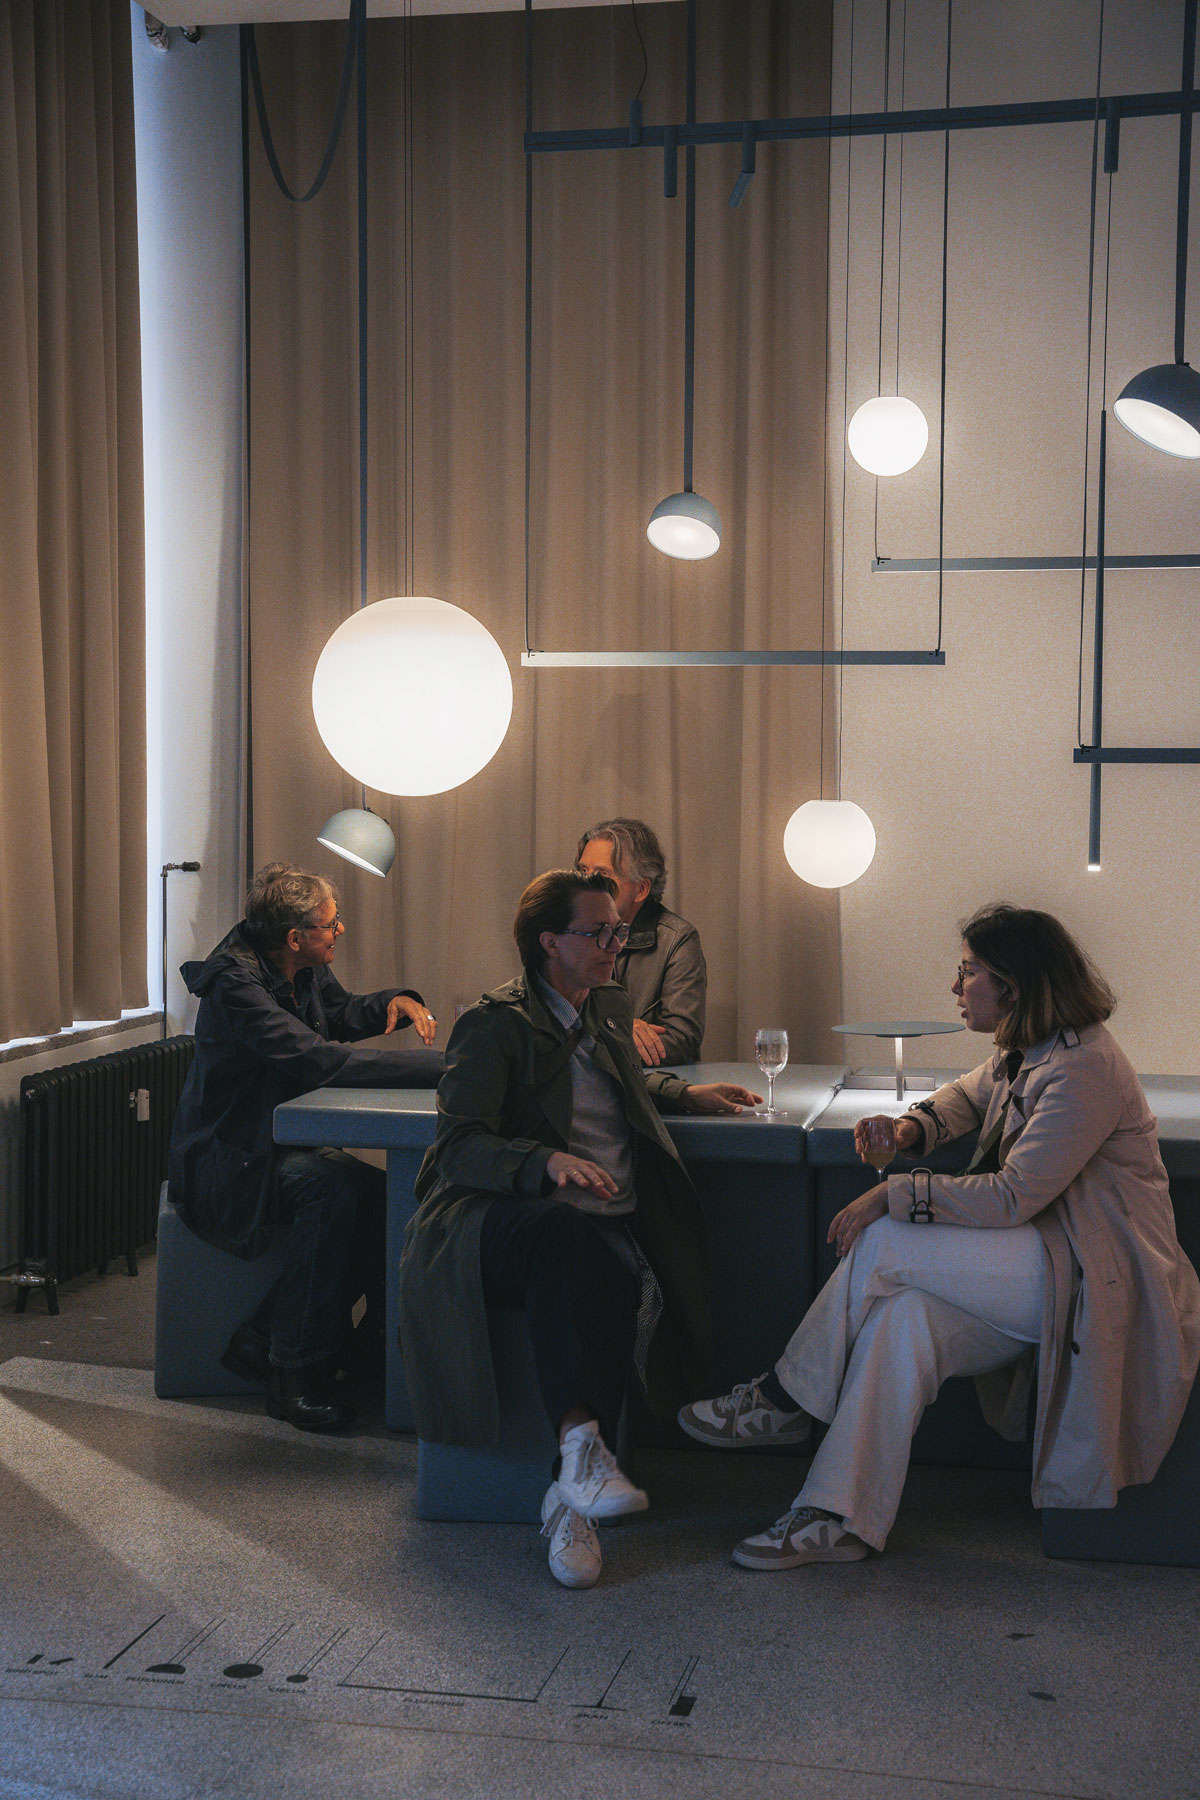 Vibia The Edit - Life in Colour: Highlights from Copenhagen’s 3DaysofDesign